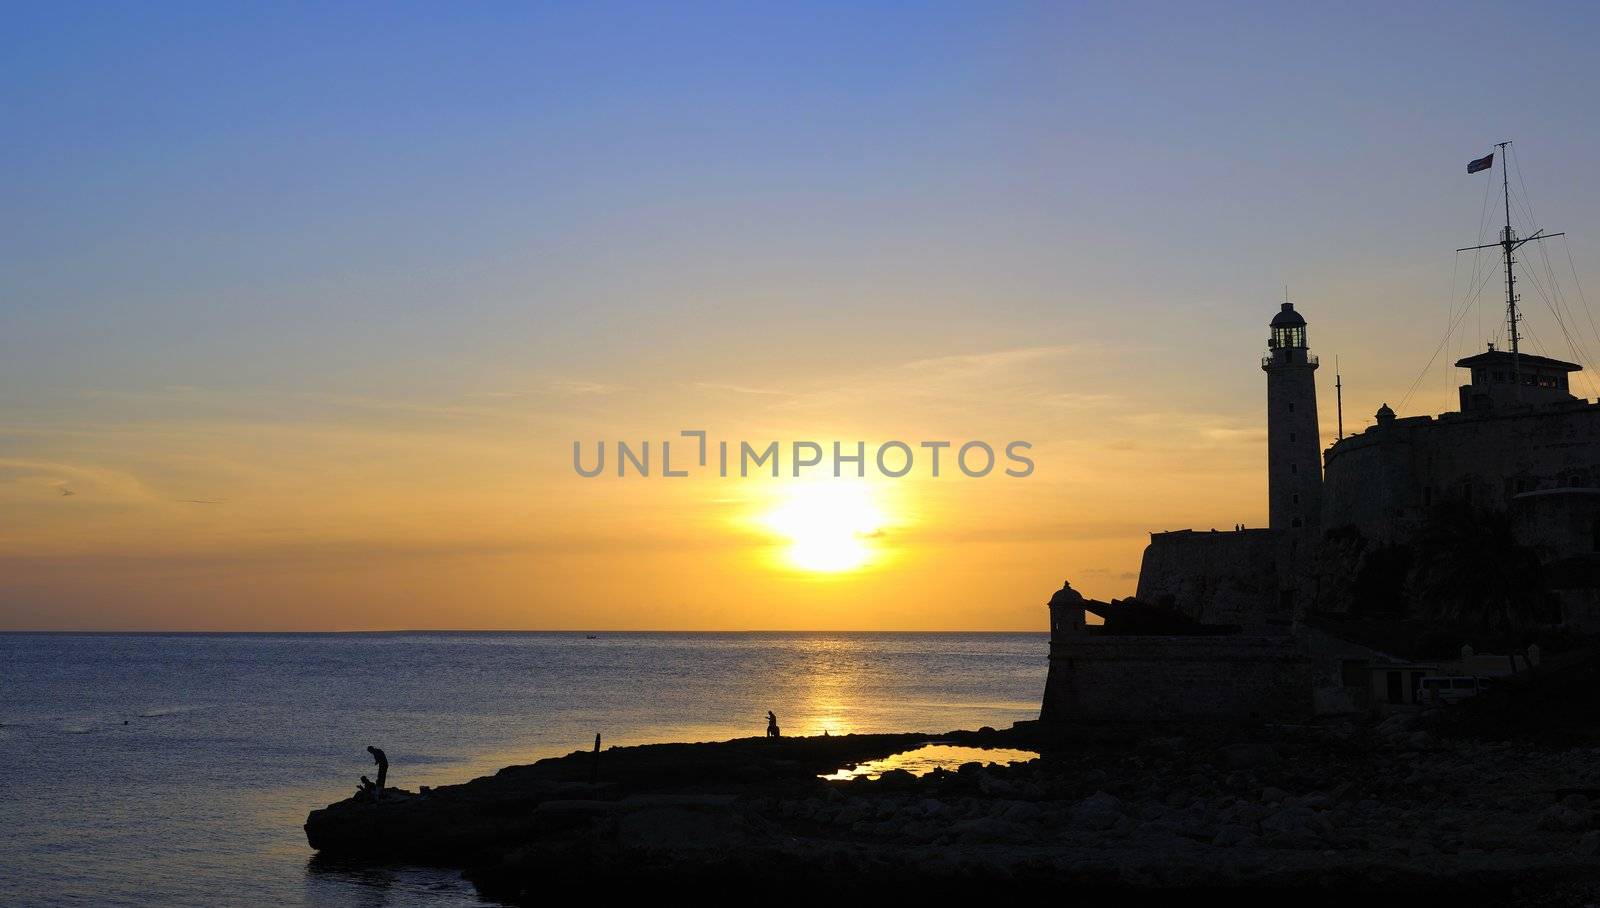 Panoramic view of Morro fortress silhouette at sunset in havana, cuba